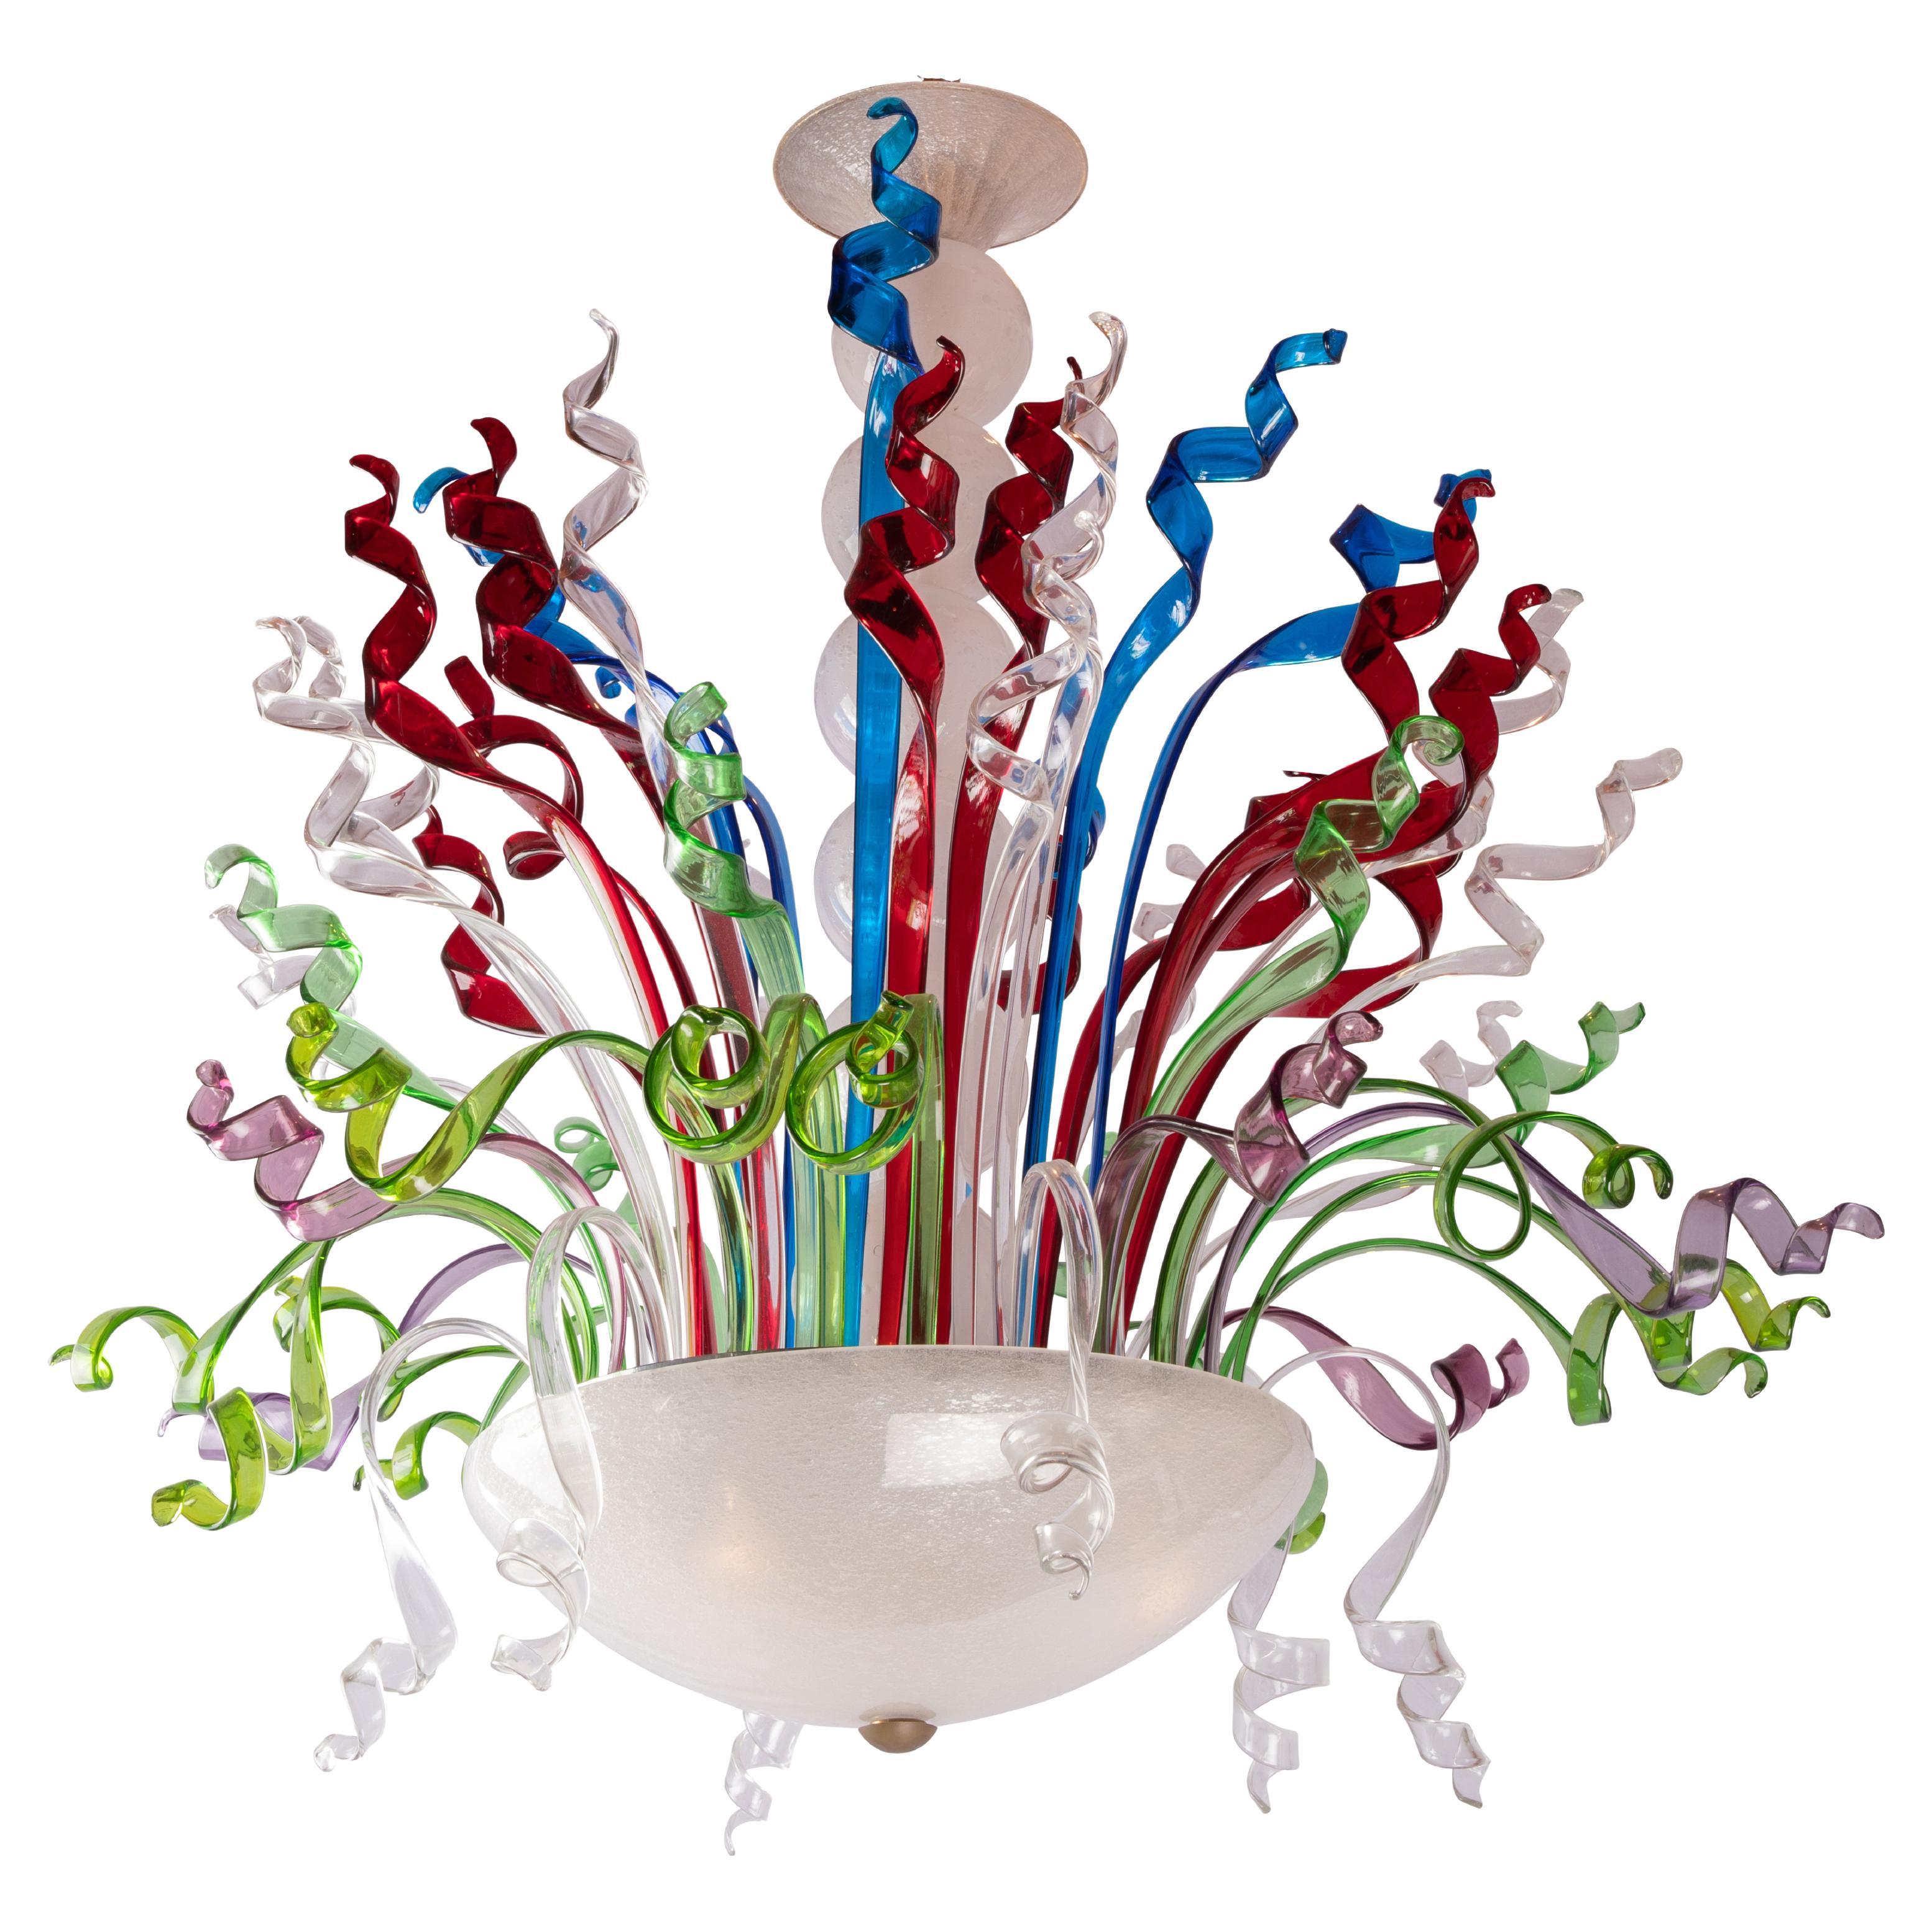 Pauly and C°, Murano Fireworks Fountain Chandelier, Blown Glass, Multi-Coloured